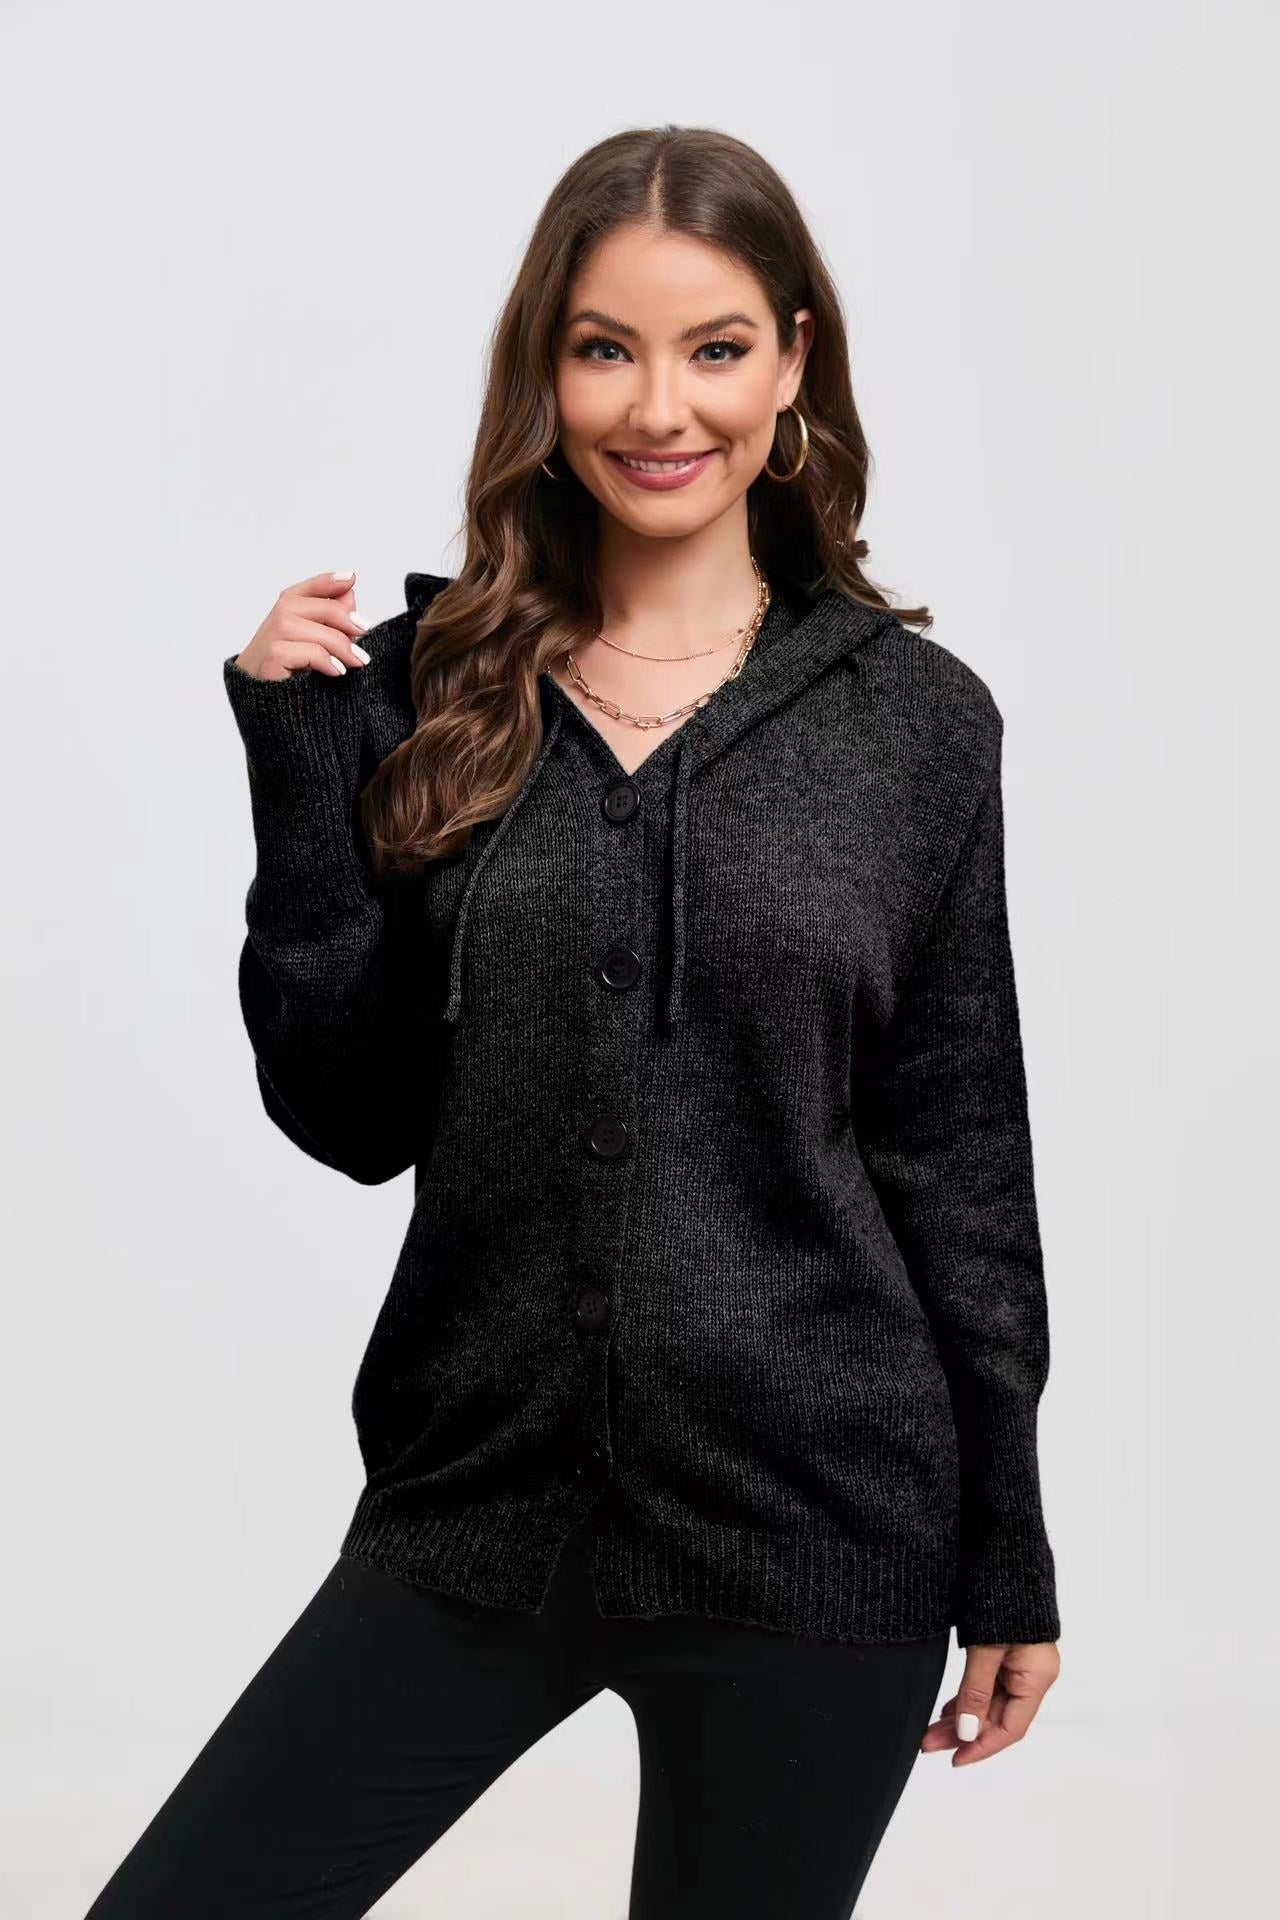 Women's Fashion Solid Color Hooded Single-breasted Sweater